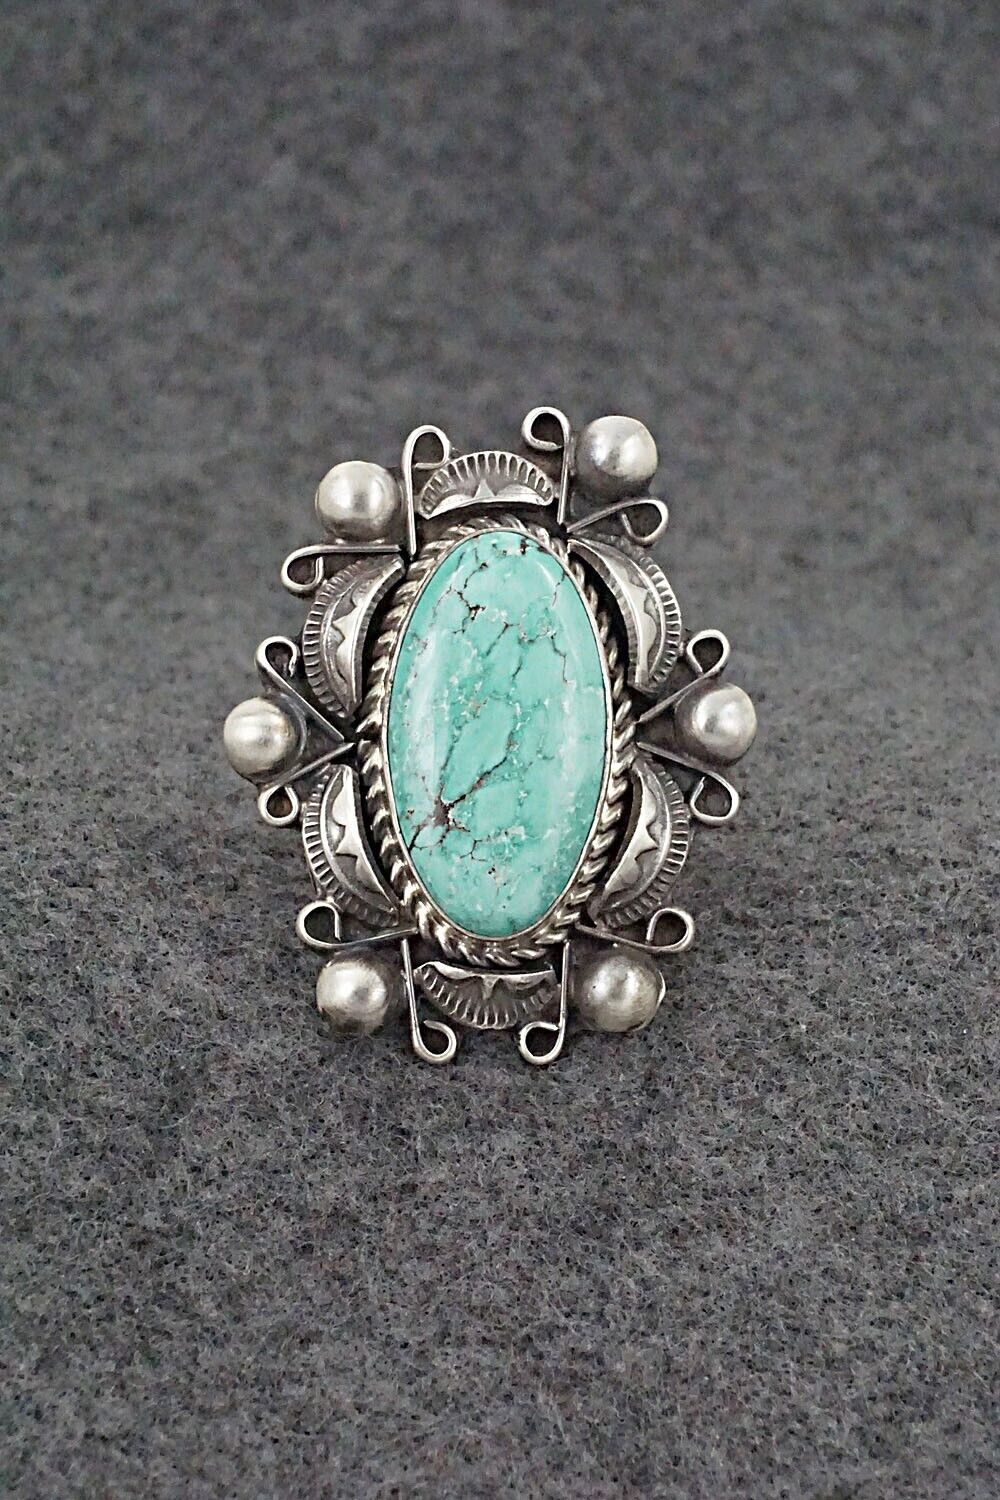 Turquoise & Sterling Silver Ring - Wilson Dawes - Size 7